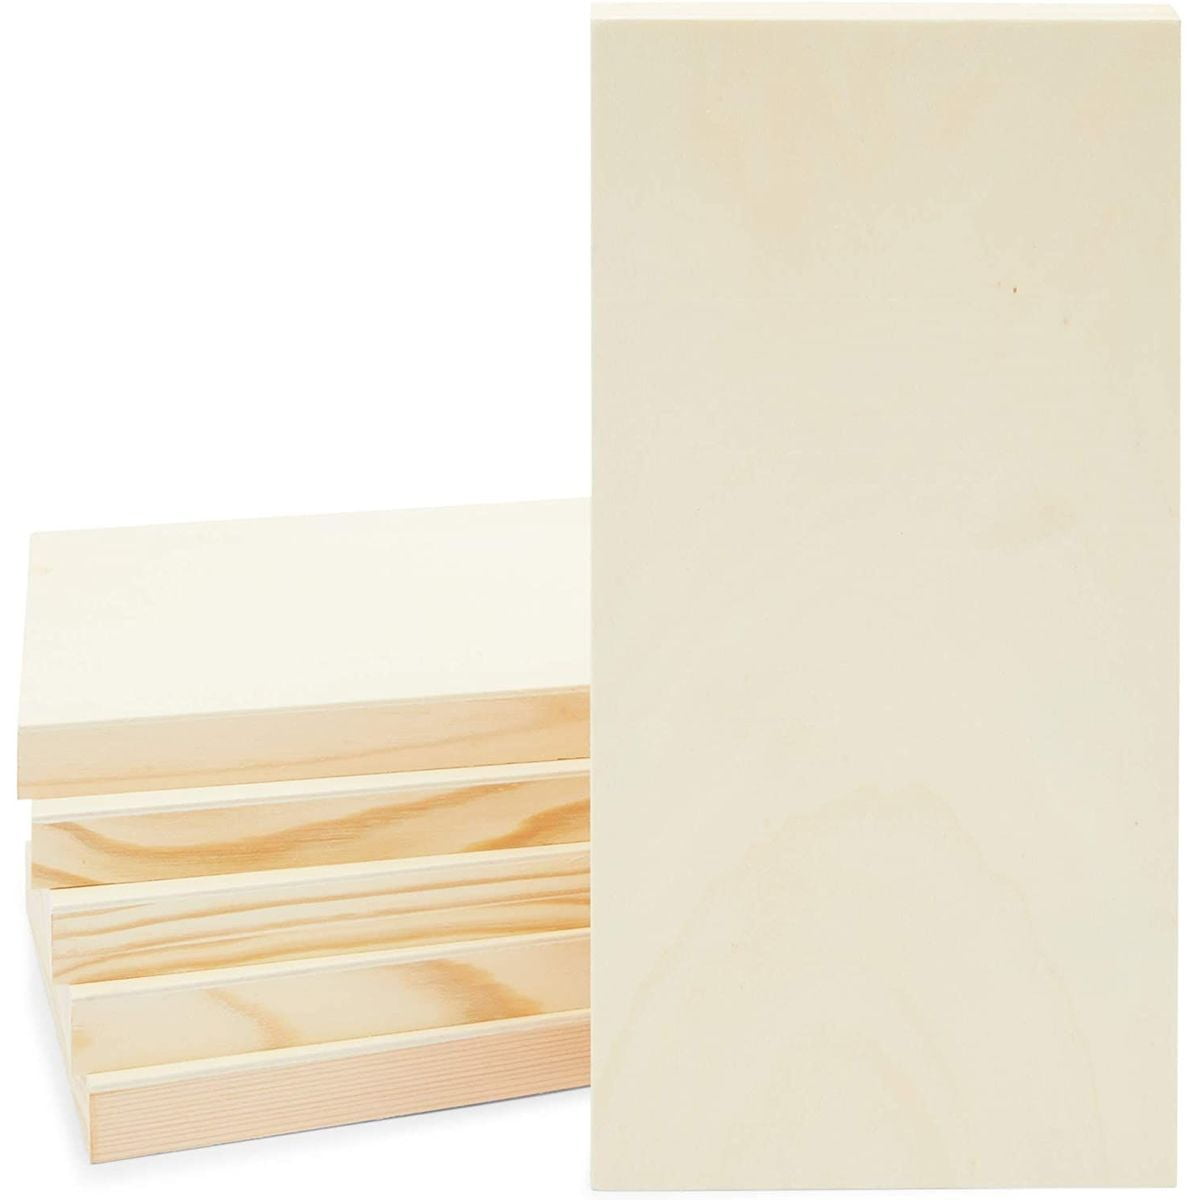 Bright Creations 4 Pack Unfinished Wood Panels for Painting, Blank Wooden Squares for Crafting & Art Pouring, 11x14 in